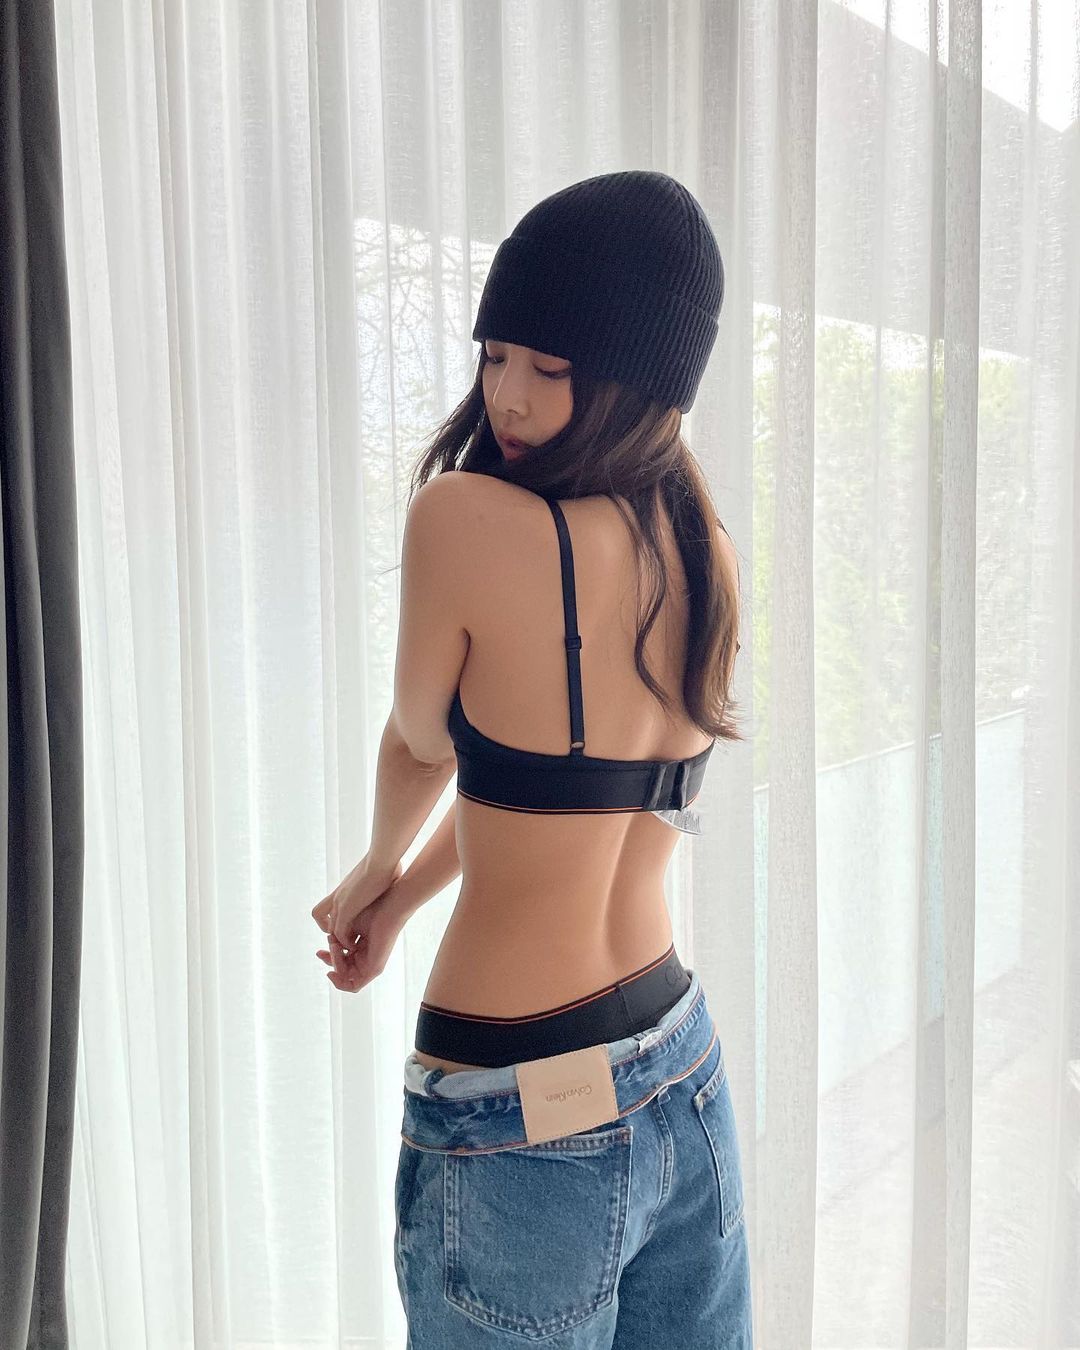 Blackpink's Jennie Kim keeps her fitness in check and her mind at